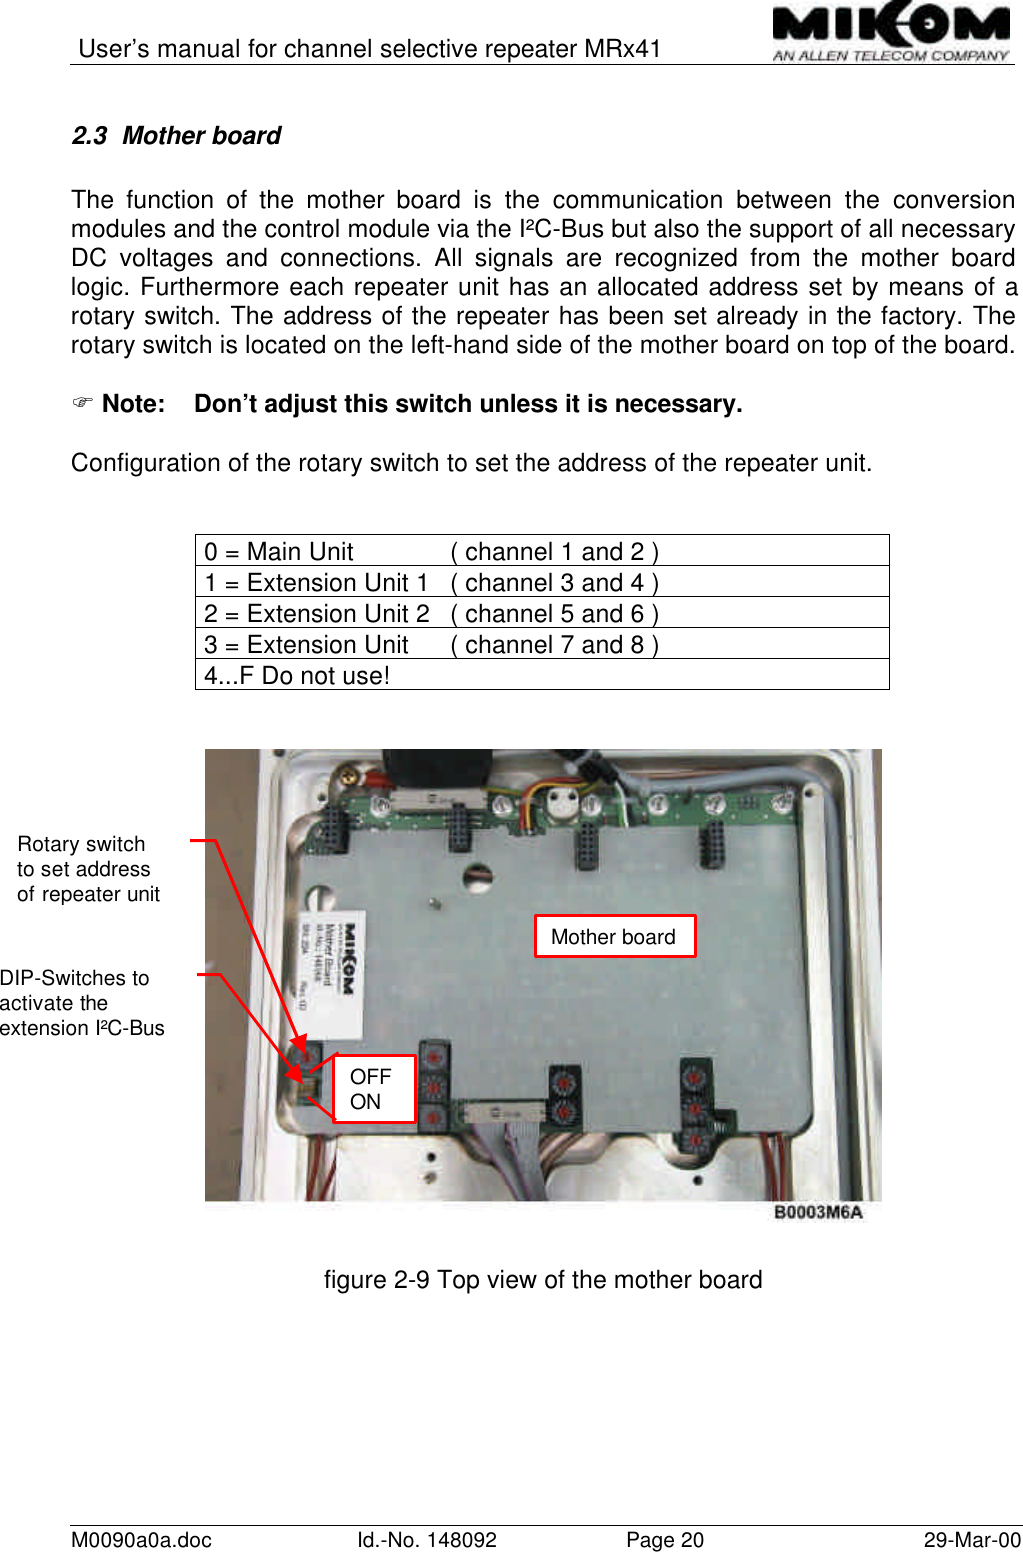 User’s manual for channel selective repeater MRx41M0090a0a.doc Id.-No. 148092 Page 20 29-Mar-002.3 Mother boardThe function of the mother board is the communication between the conversionmodules and the control module via the I²C-Bus but also the support of all necessaryDC voltages and connections. All signals are recognized from the mother boardlogic. Furthermore each repeater unit has an allocated address set by means of arotary switch. The address of the repeater has been set already in the factory. Therotary switch is located on the left-hand side of the mother board on top of the board.F Note: Don’t adjust this switch unless it is necessary.Configuration of the rotary switch to set the address of the repeater unit.0 = Main Unit  ( channel 1 and 2 )1 = Extension Unit 1 ( channel 3 and 4 )2 = Extension Unit 2 ( channel 5 and 6 )3 = Extension Unit  ( channel 7 and 8 )4...F Do not use!figure 2-9 Top view of the mother boardMother boardRotary switchto set addressof repeater unitDIP-Switches toactivate theextension I²C-BusOFFON